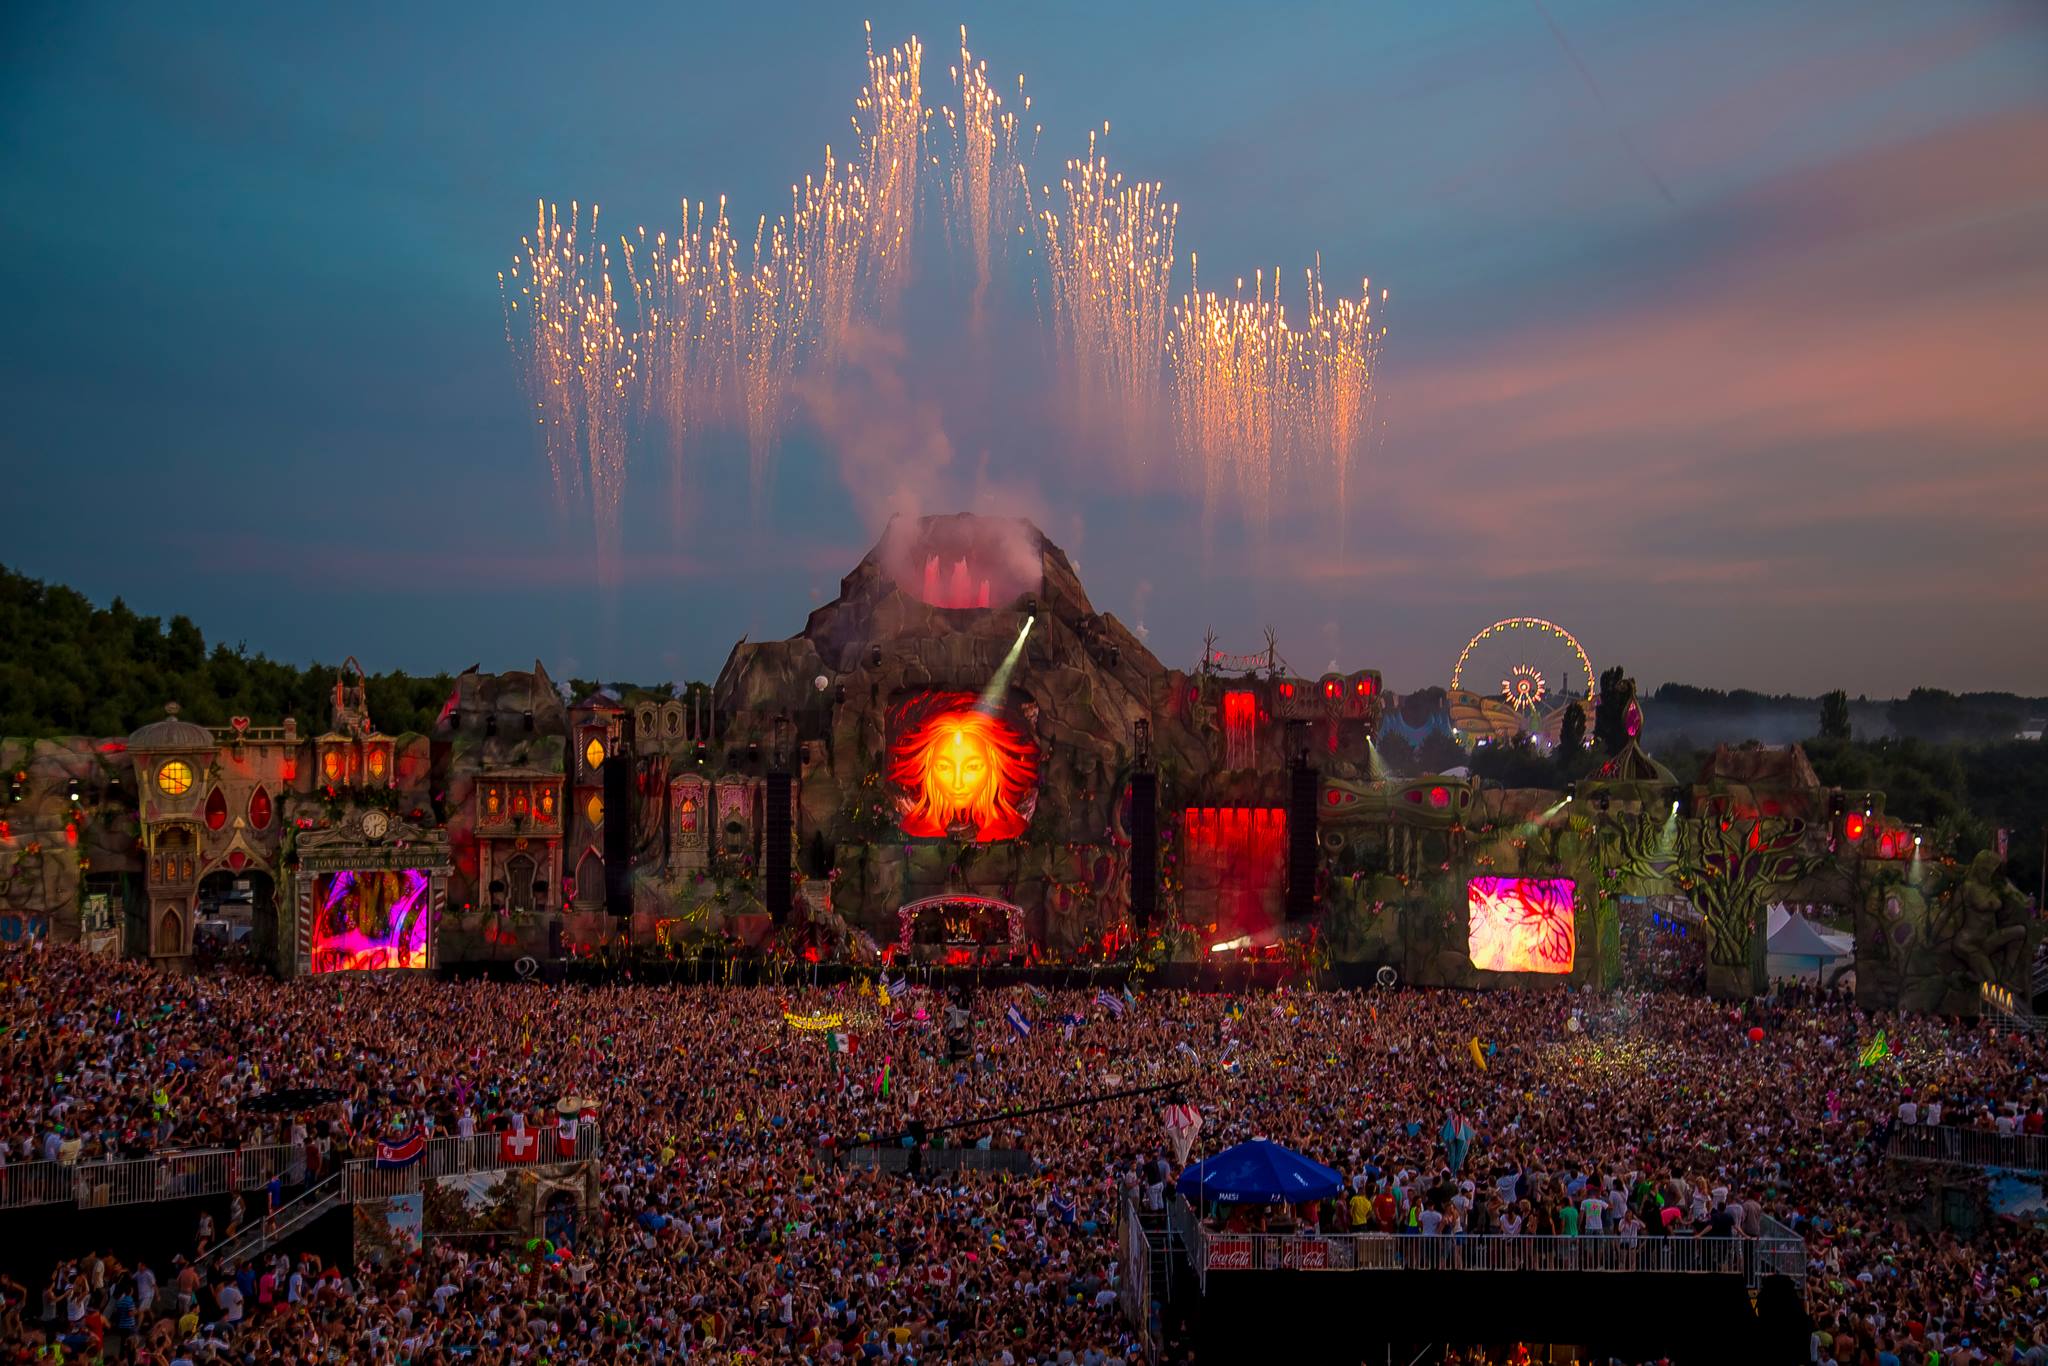 10 Things You Didn’t Know About the TomorrowLand Festival